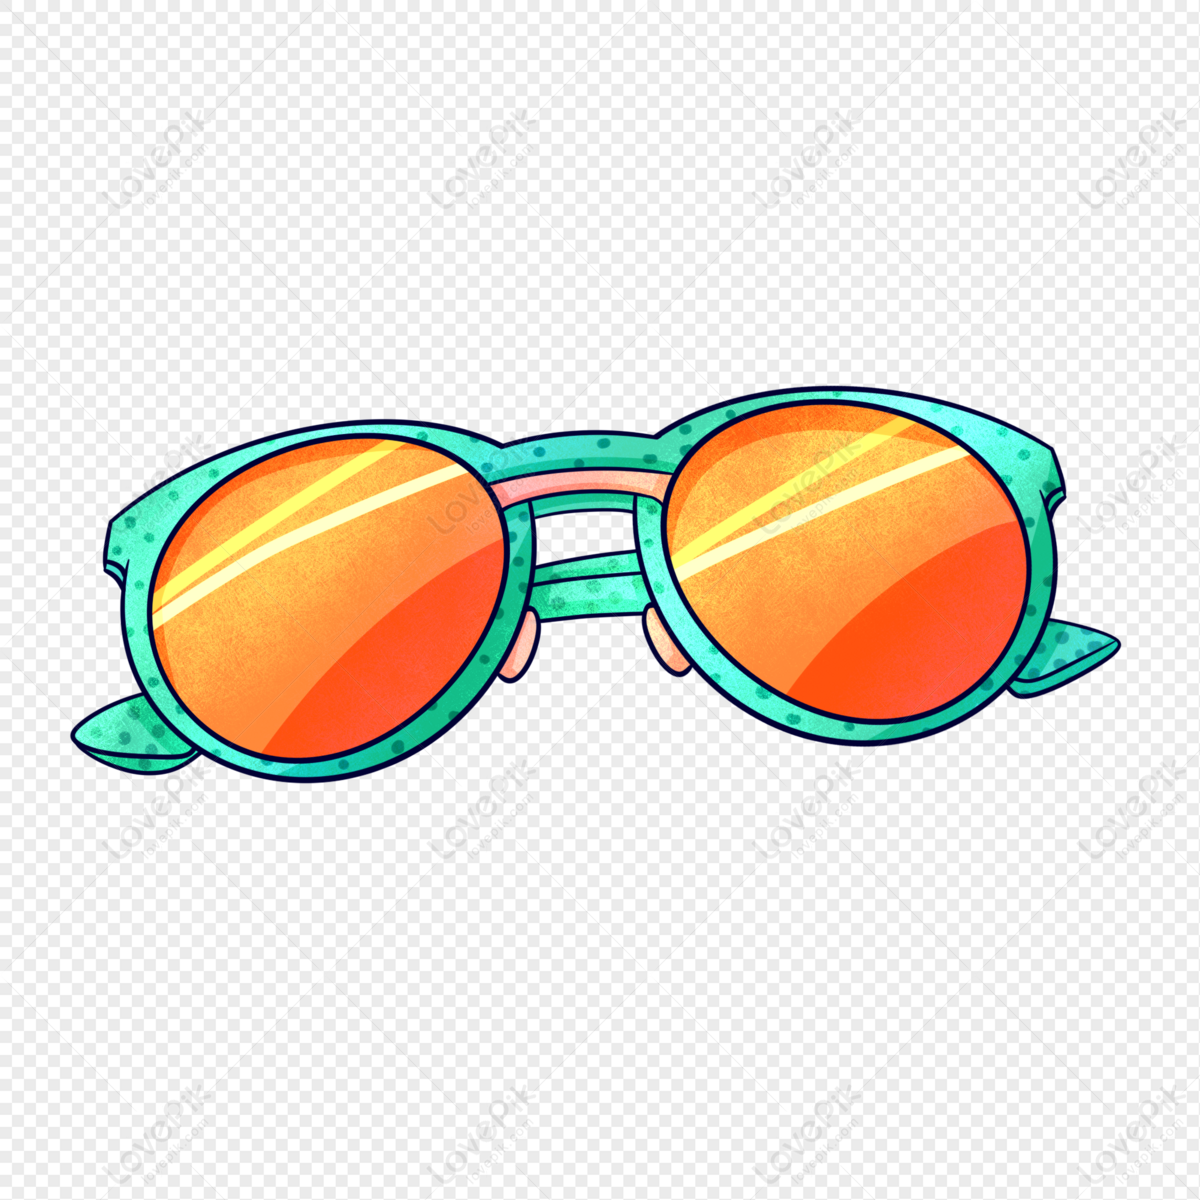 Cartoon Sunglasses PNG Picture And Clipart Image For Free Download -  Lovepik | 401425455